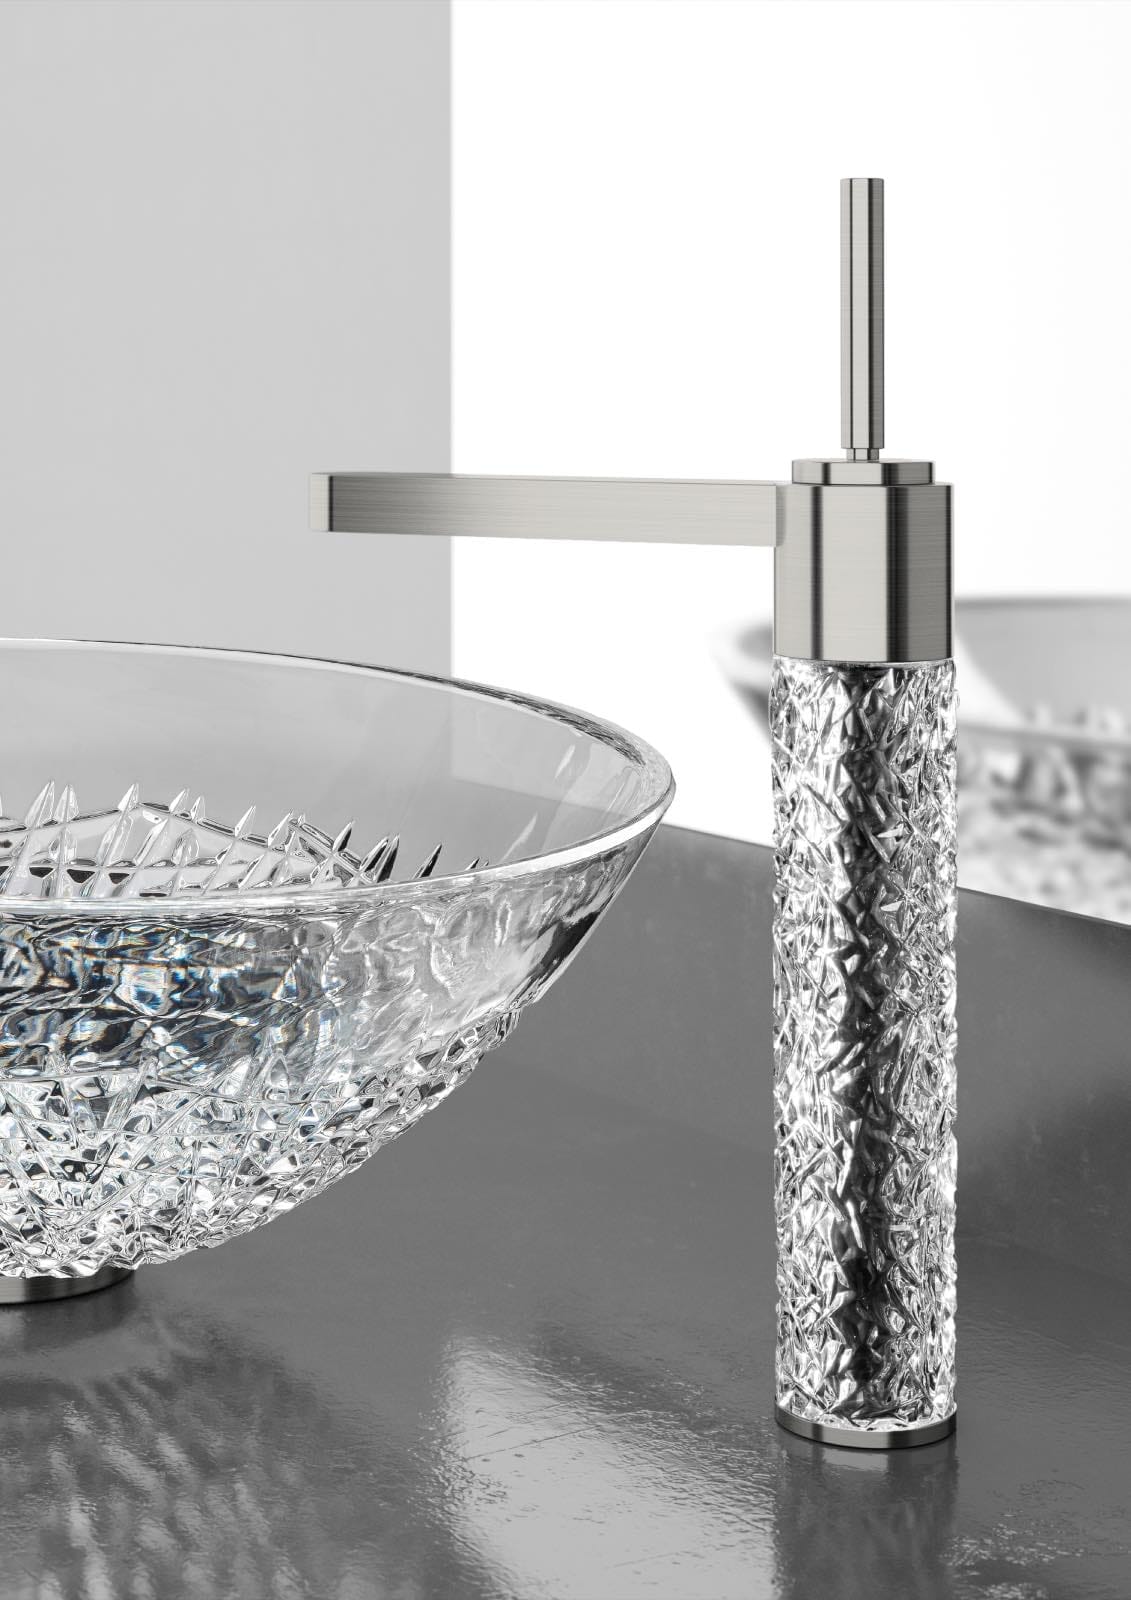 Designer glass and steel faucet and sink for the bathroom